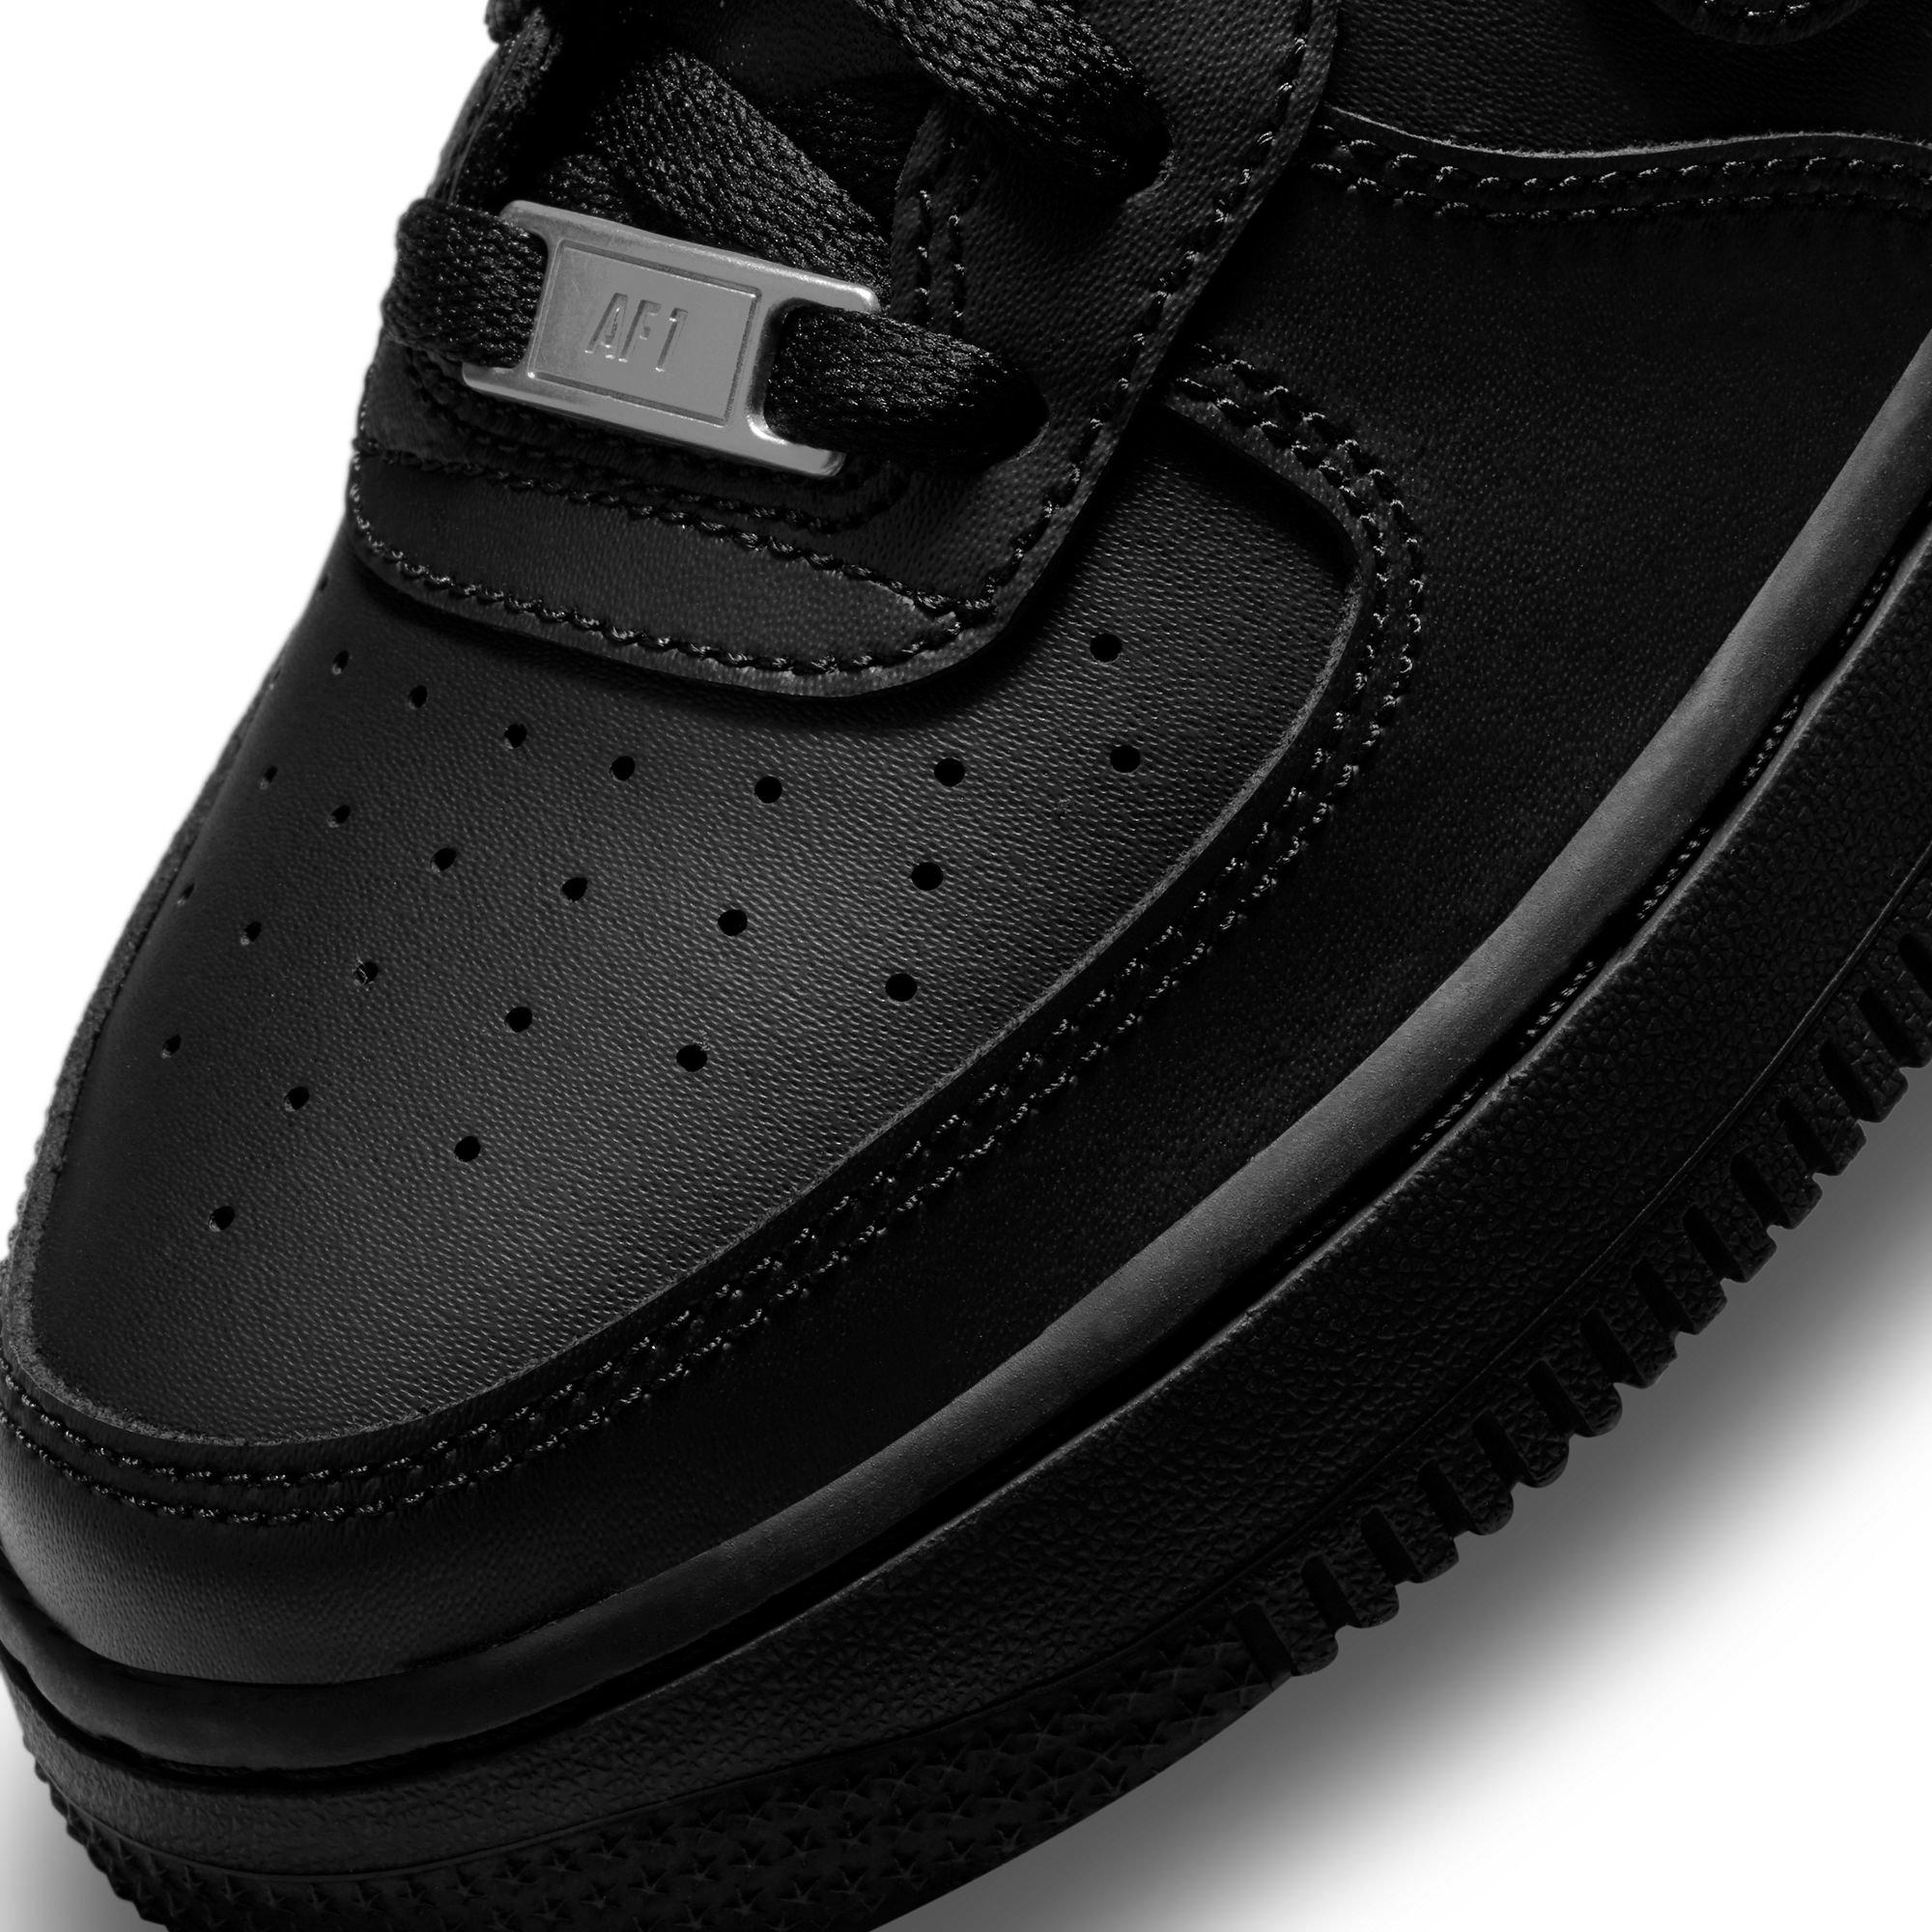 size 3 black air force 1